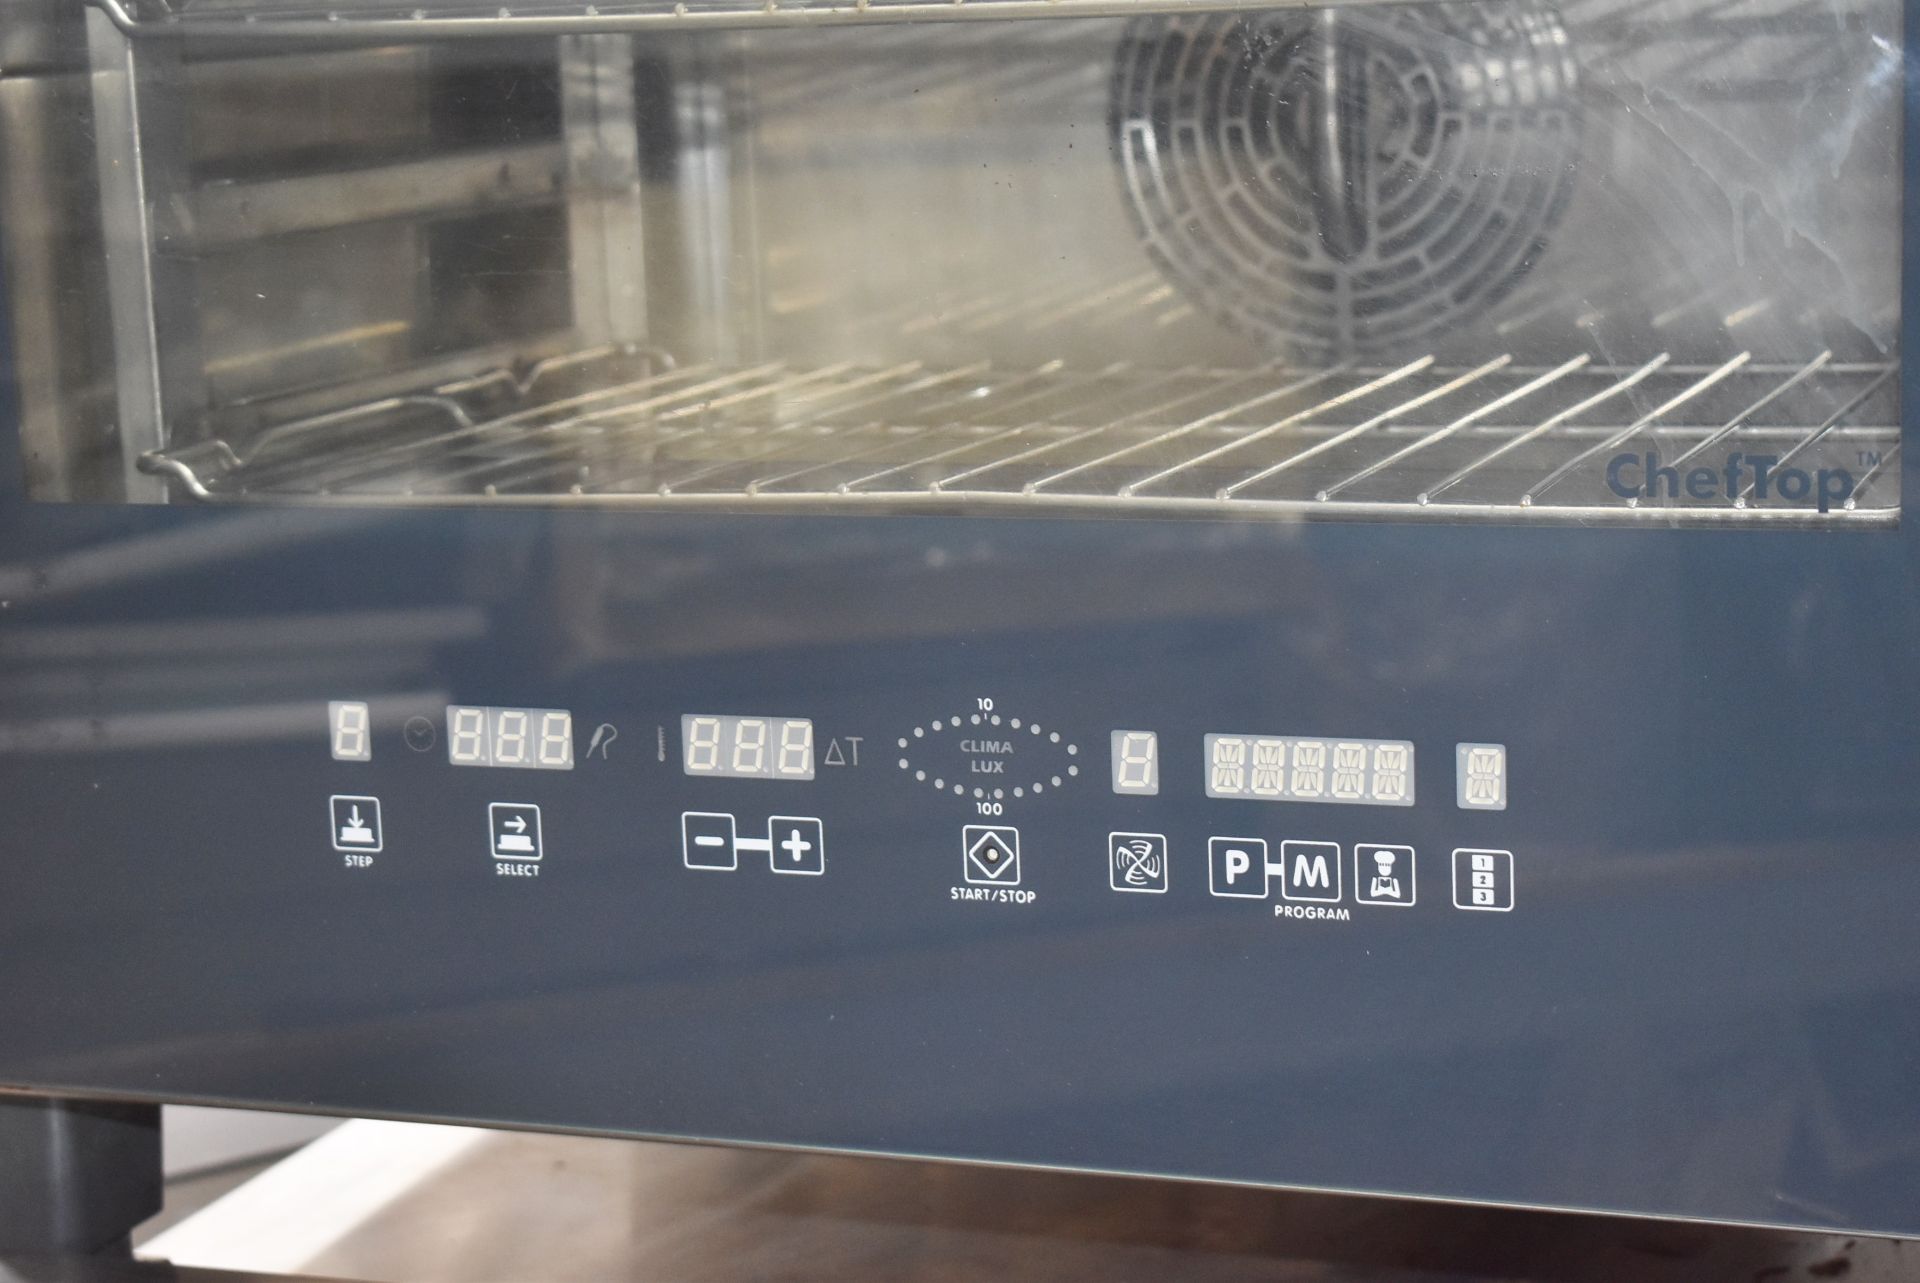 1 x Unox ChefTop XVL385 Commercial 3 Phase Double Oven For Slow Cooking Meats, Proving Dough & More - Image 3 of 26